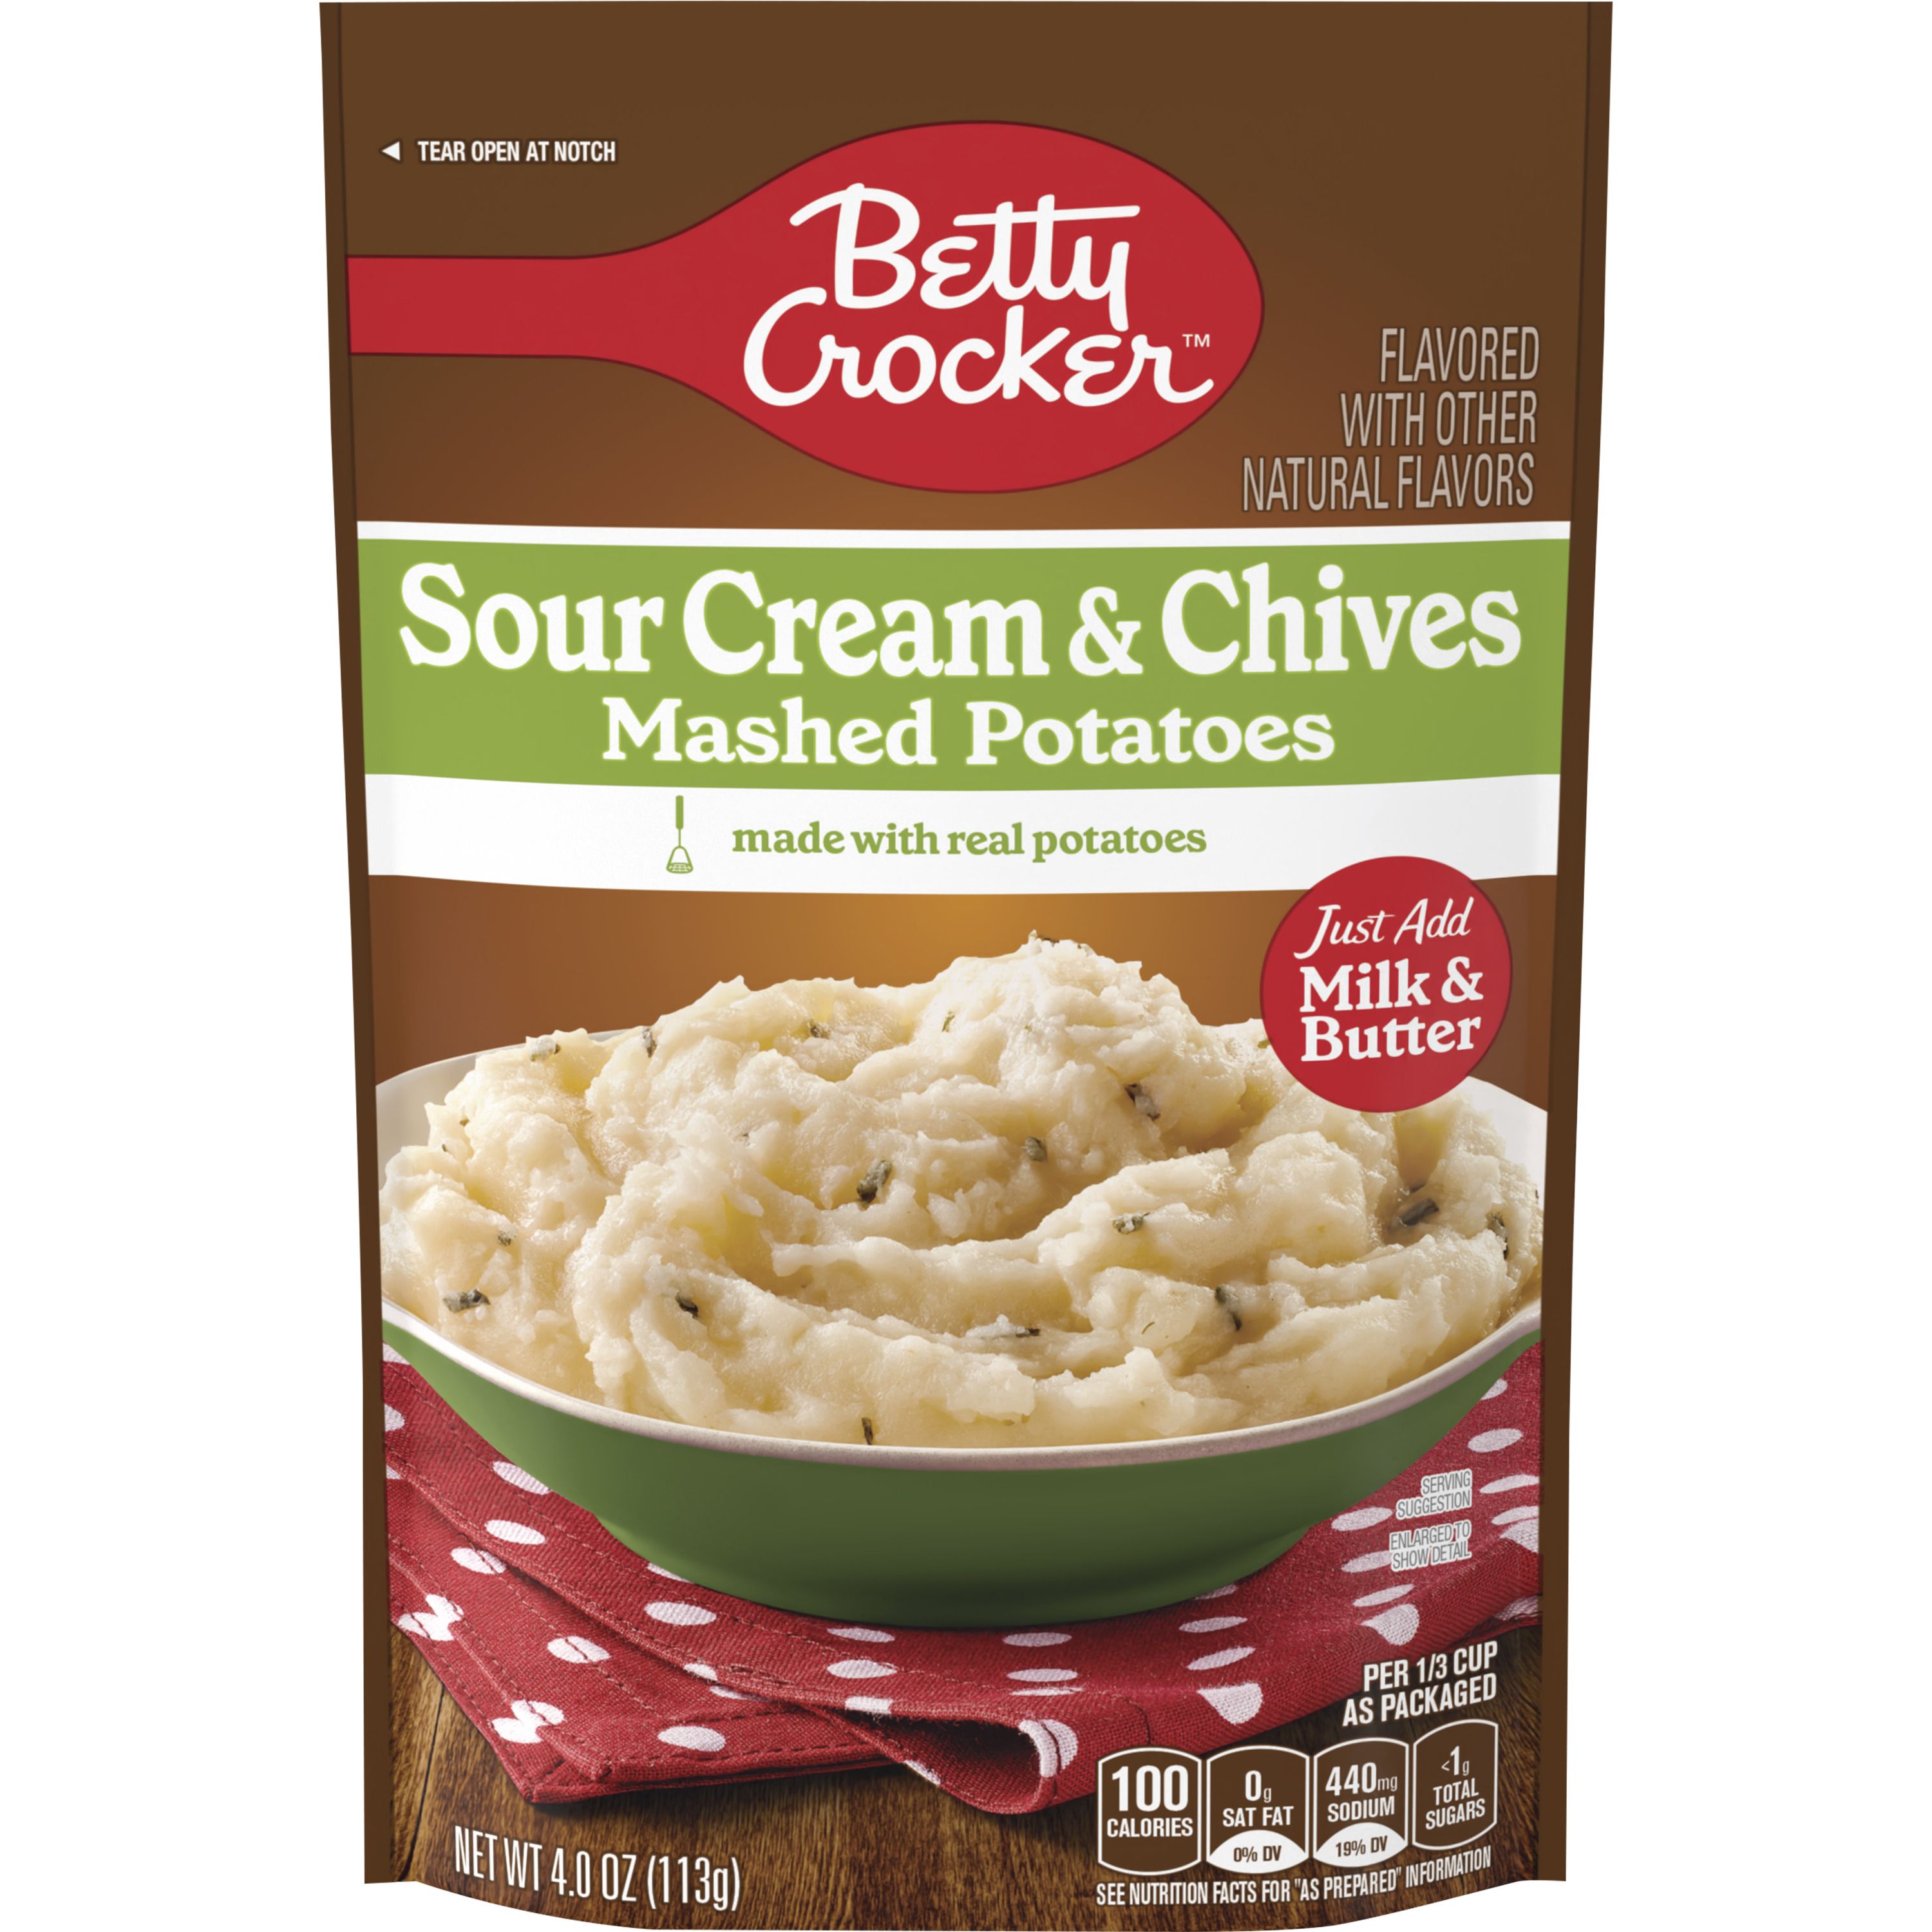 Betty Crocker Sour Cream & Chives Mashed Potatoes, 4 oz. - Front